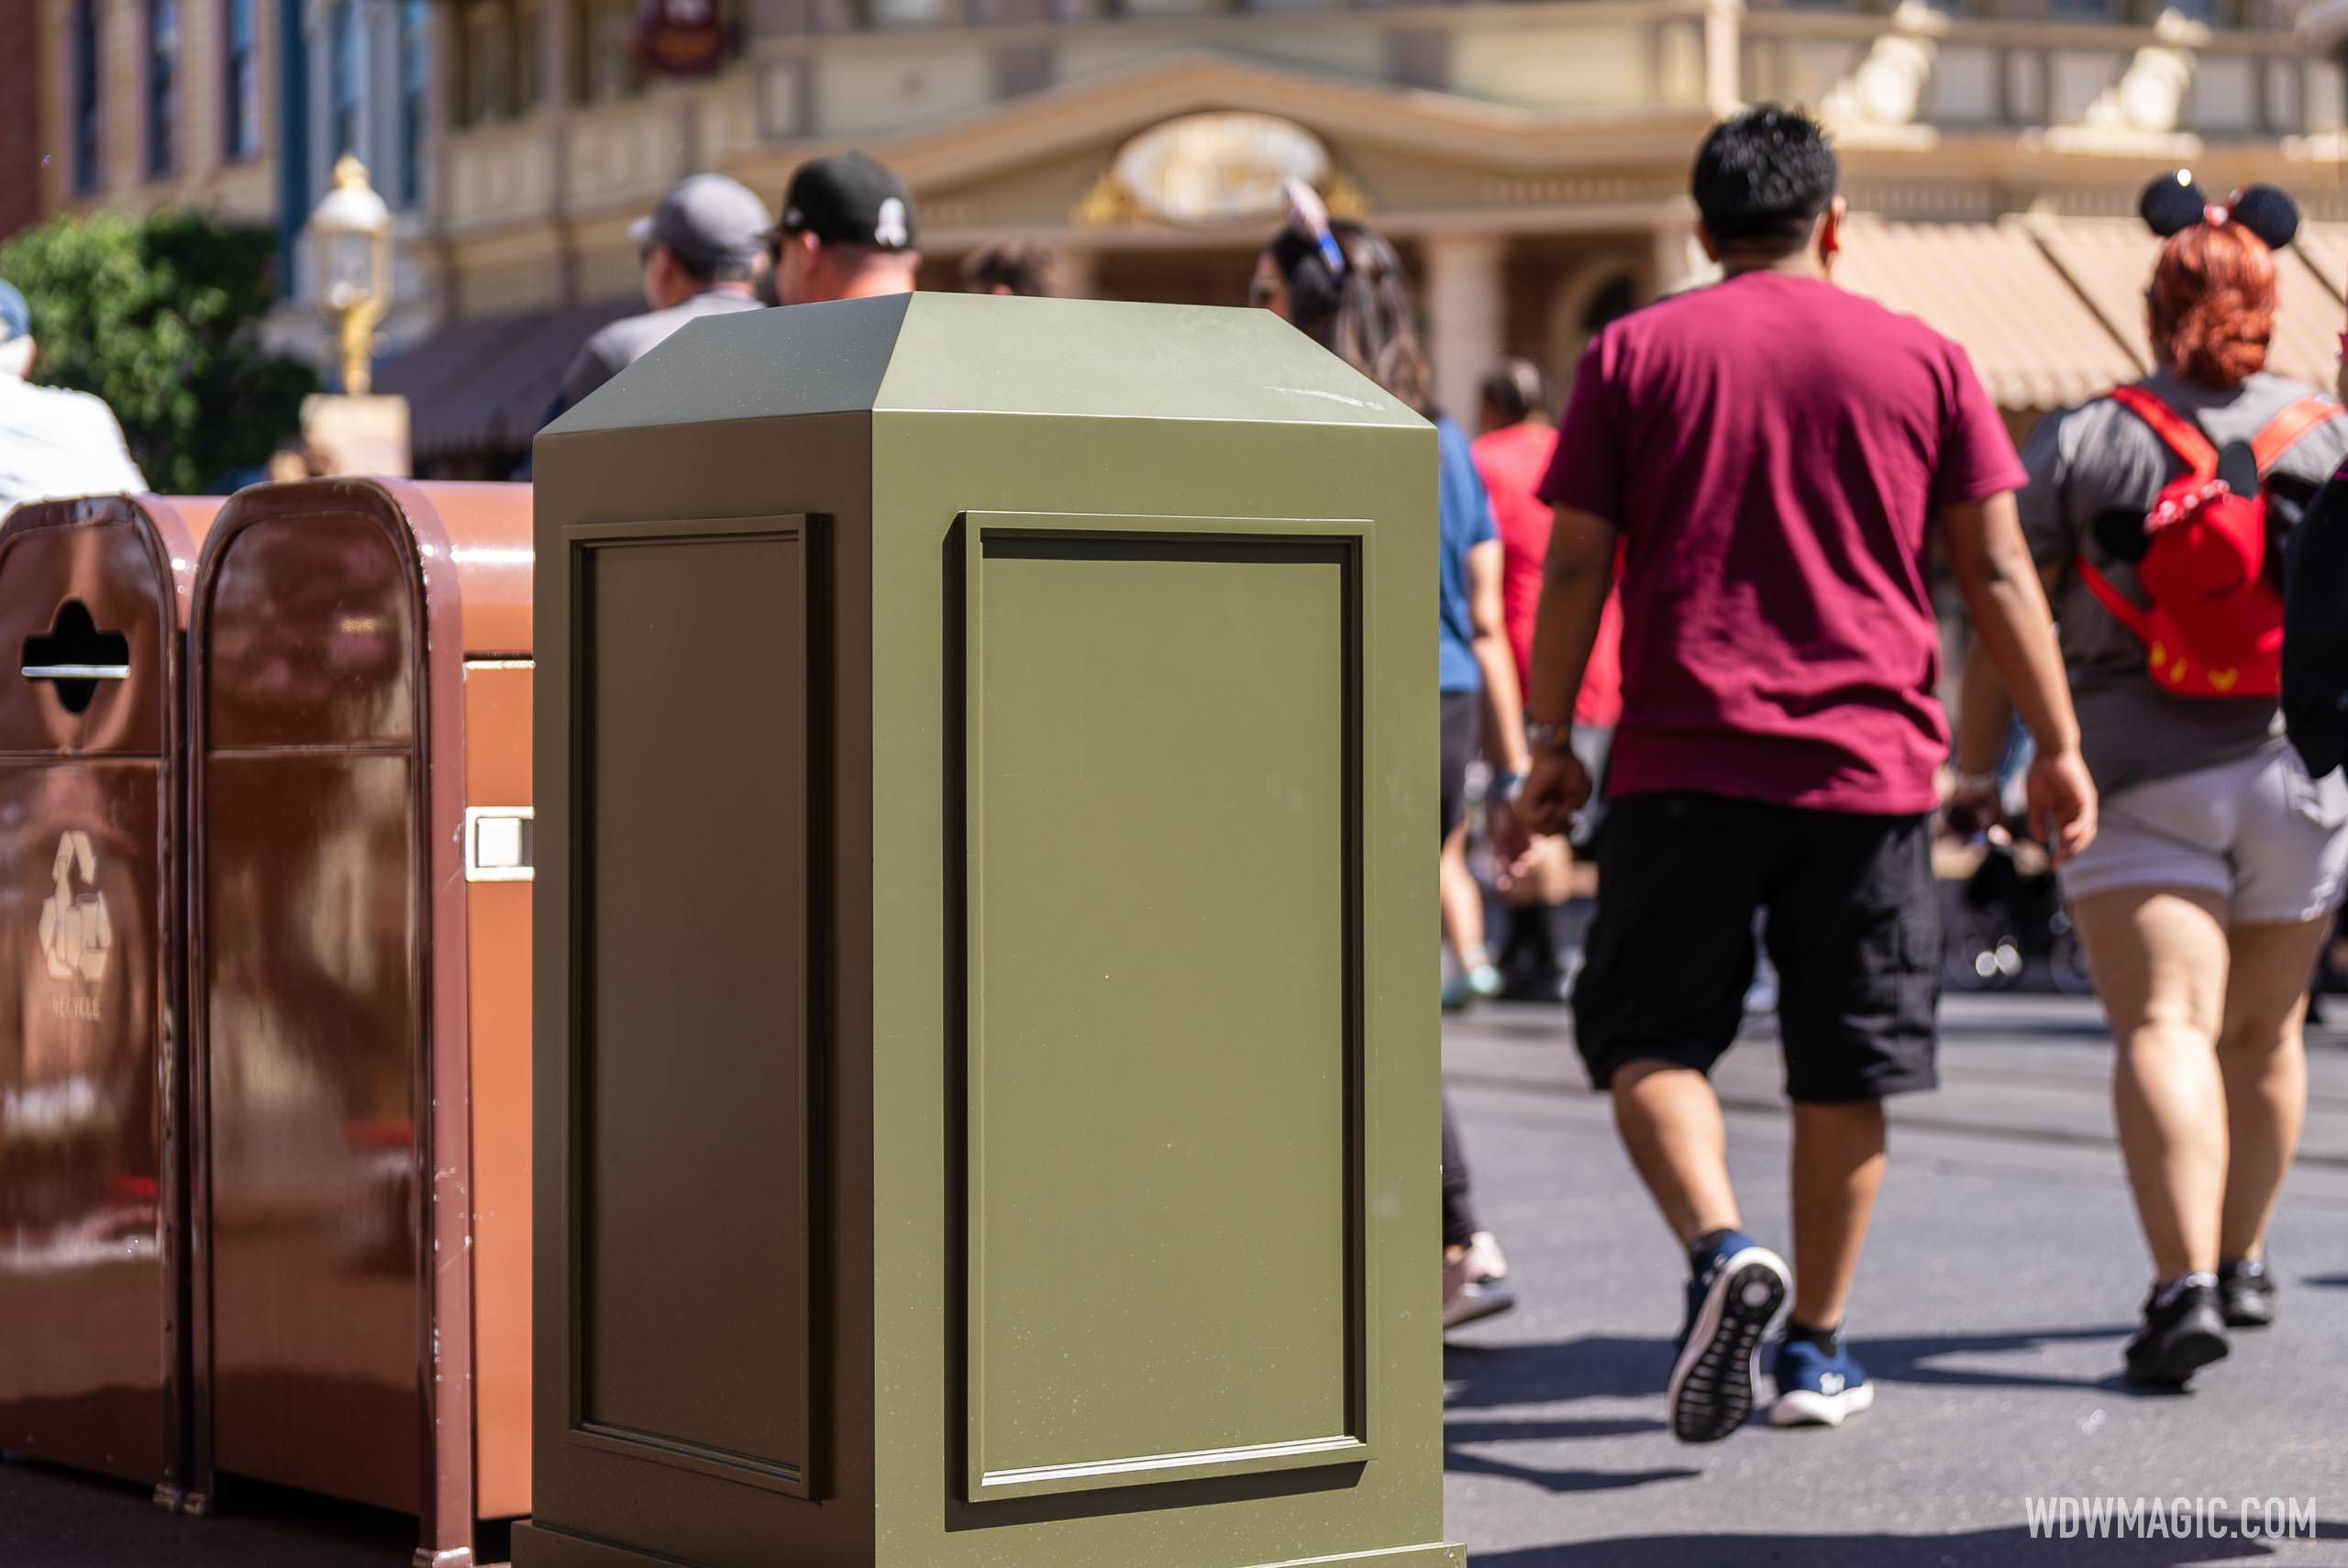 50th edition golden clock removed from Main Street U.S.A. at Magic Kingdom